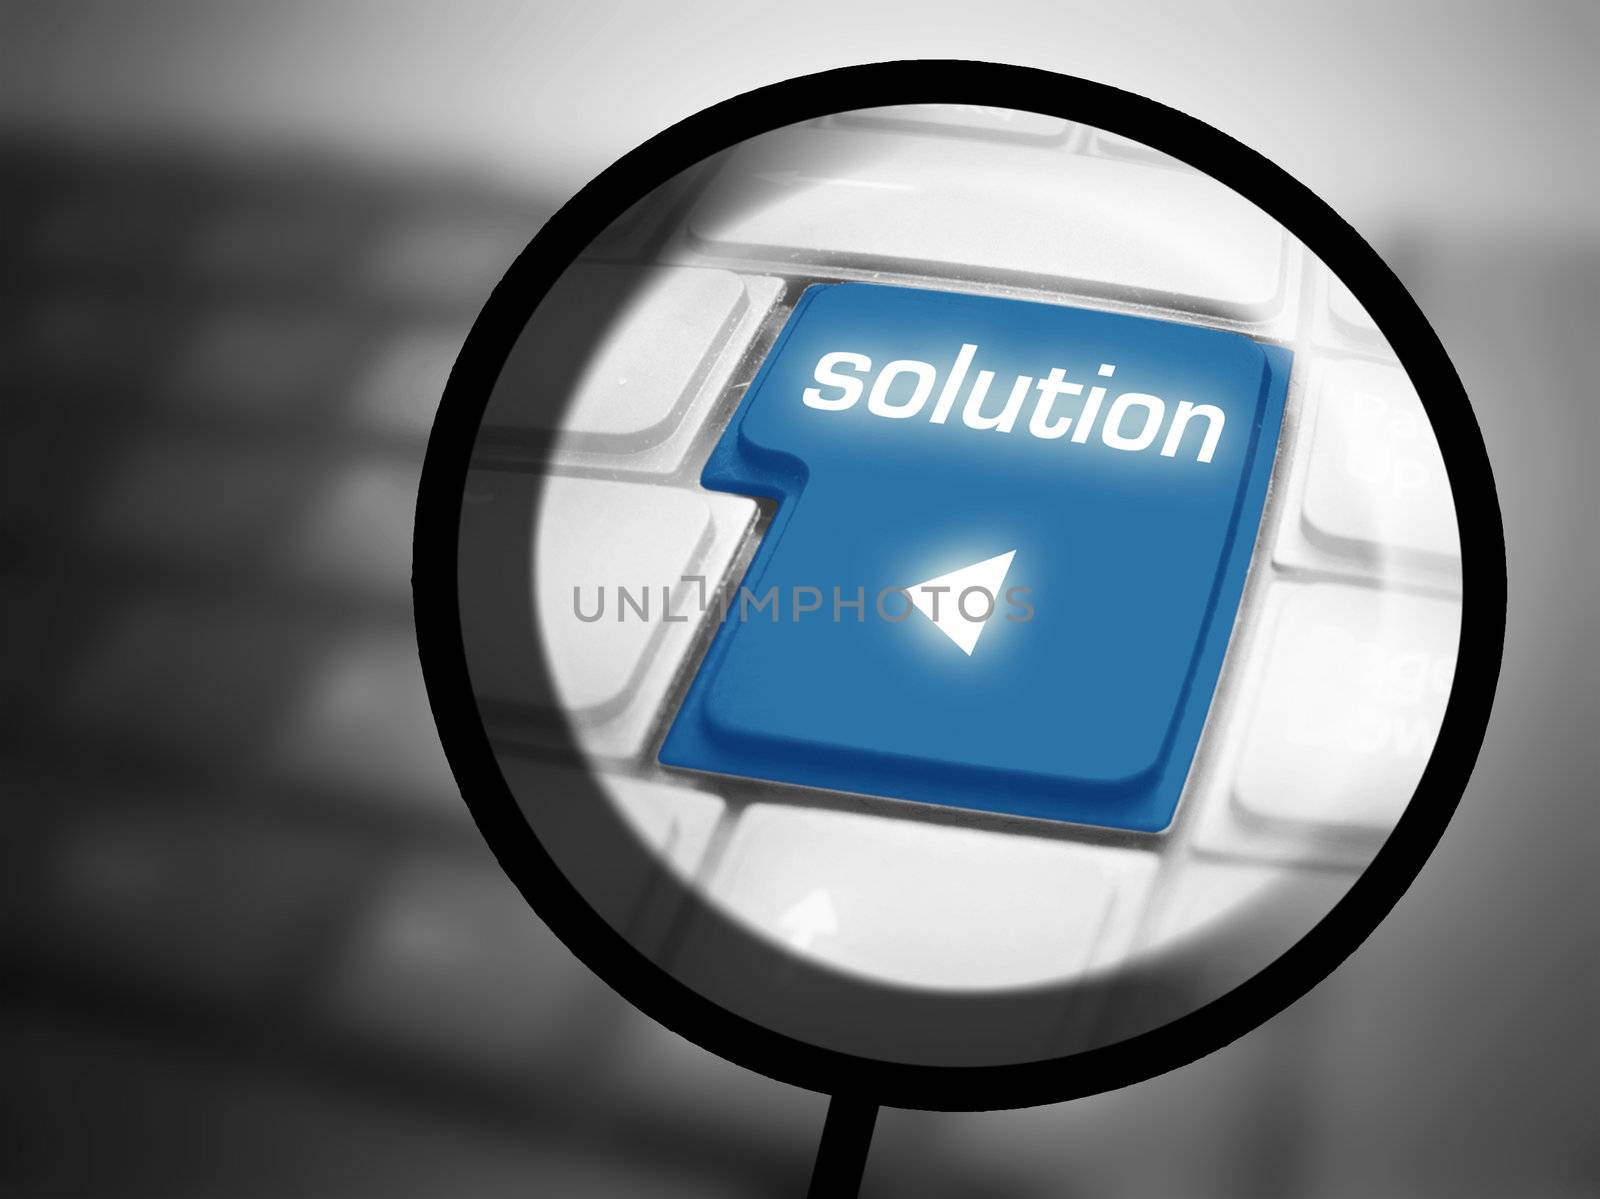 Solution button on keyboard by photocreo